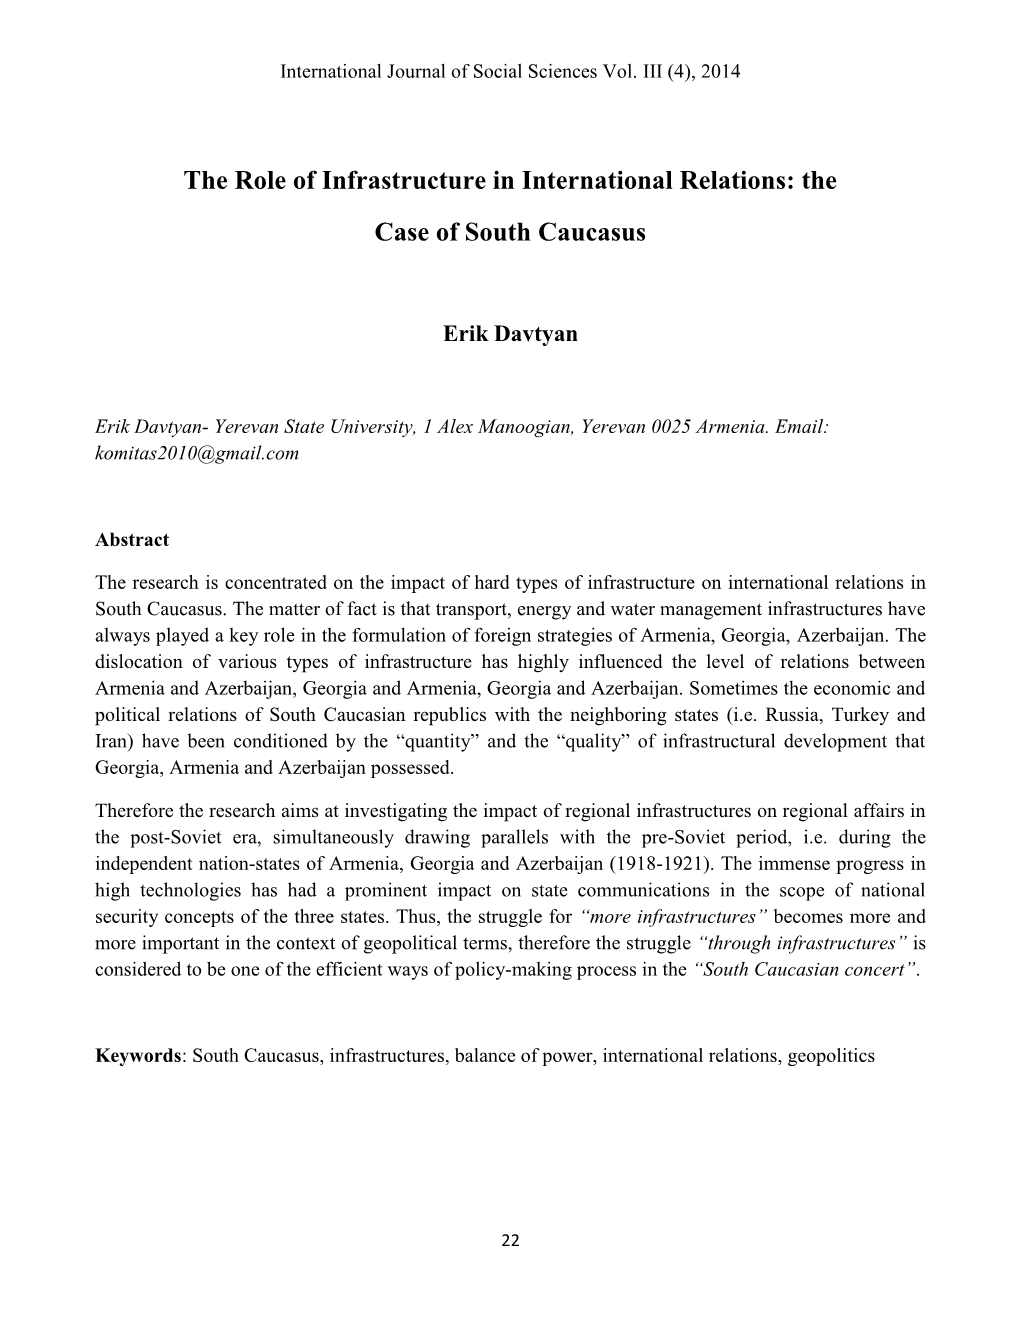 The Role of Infrastructure in International Relations: the Case of South Caucasus